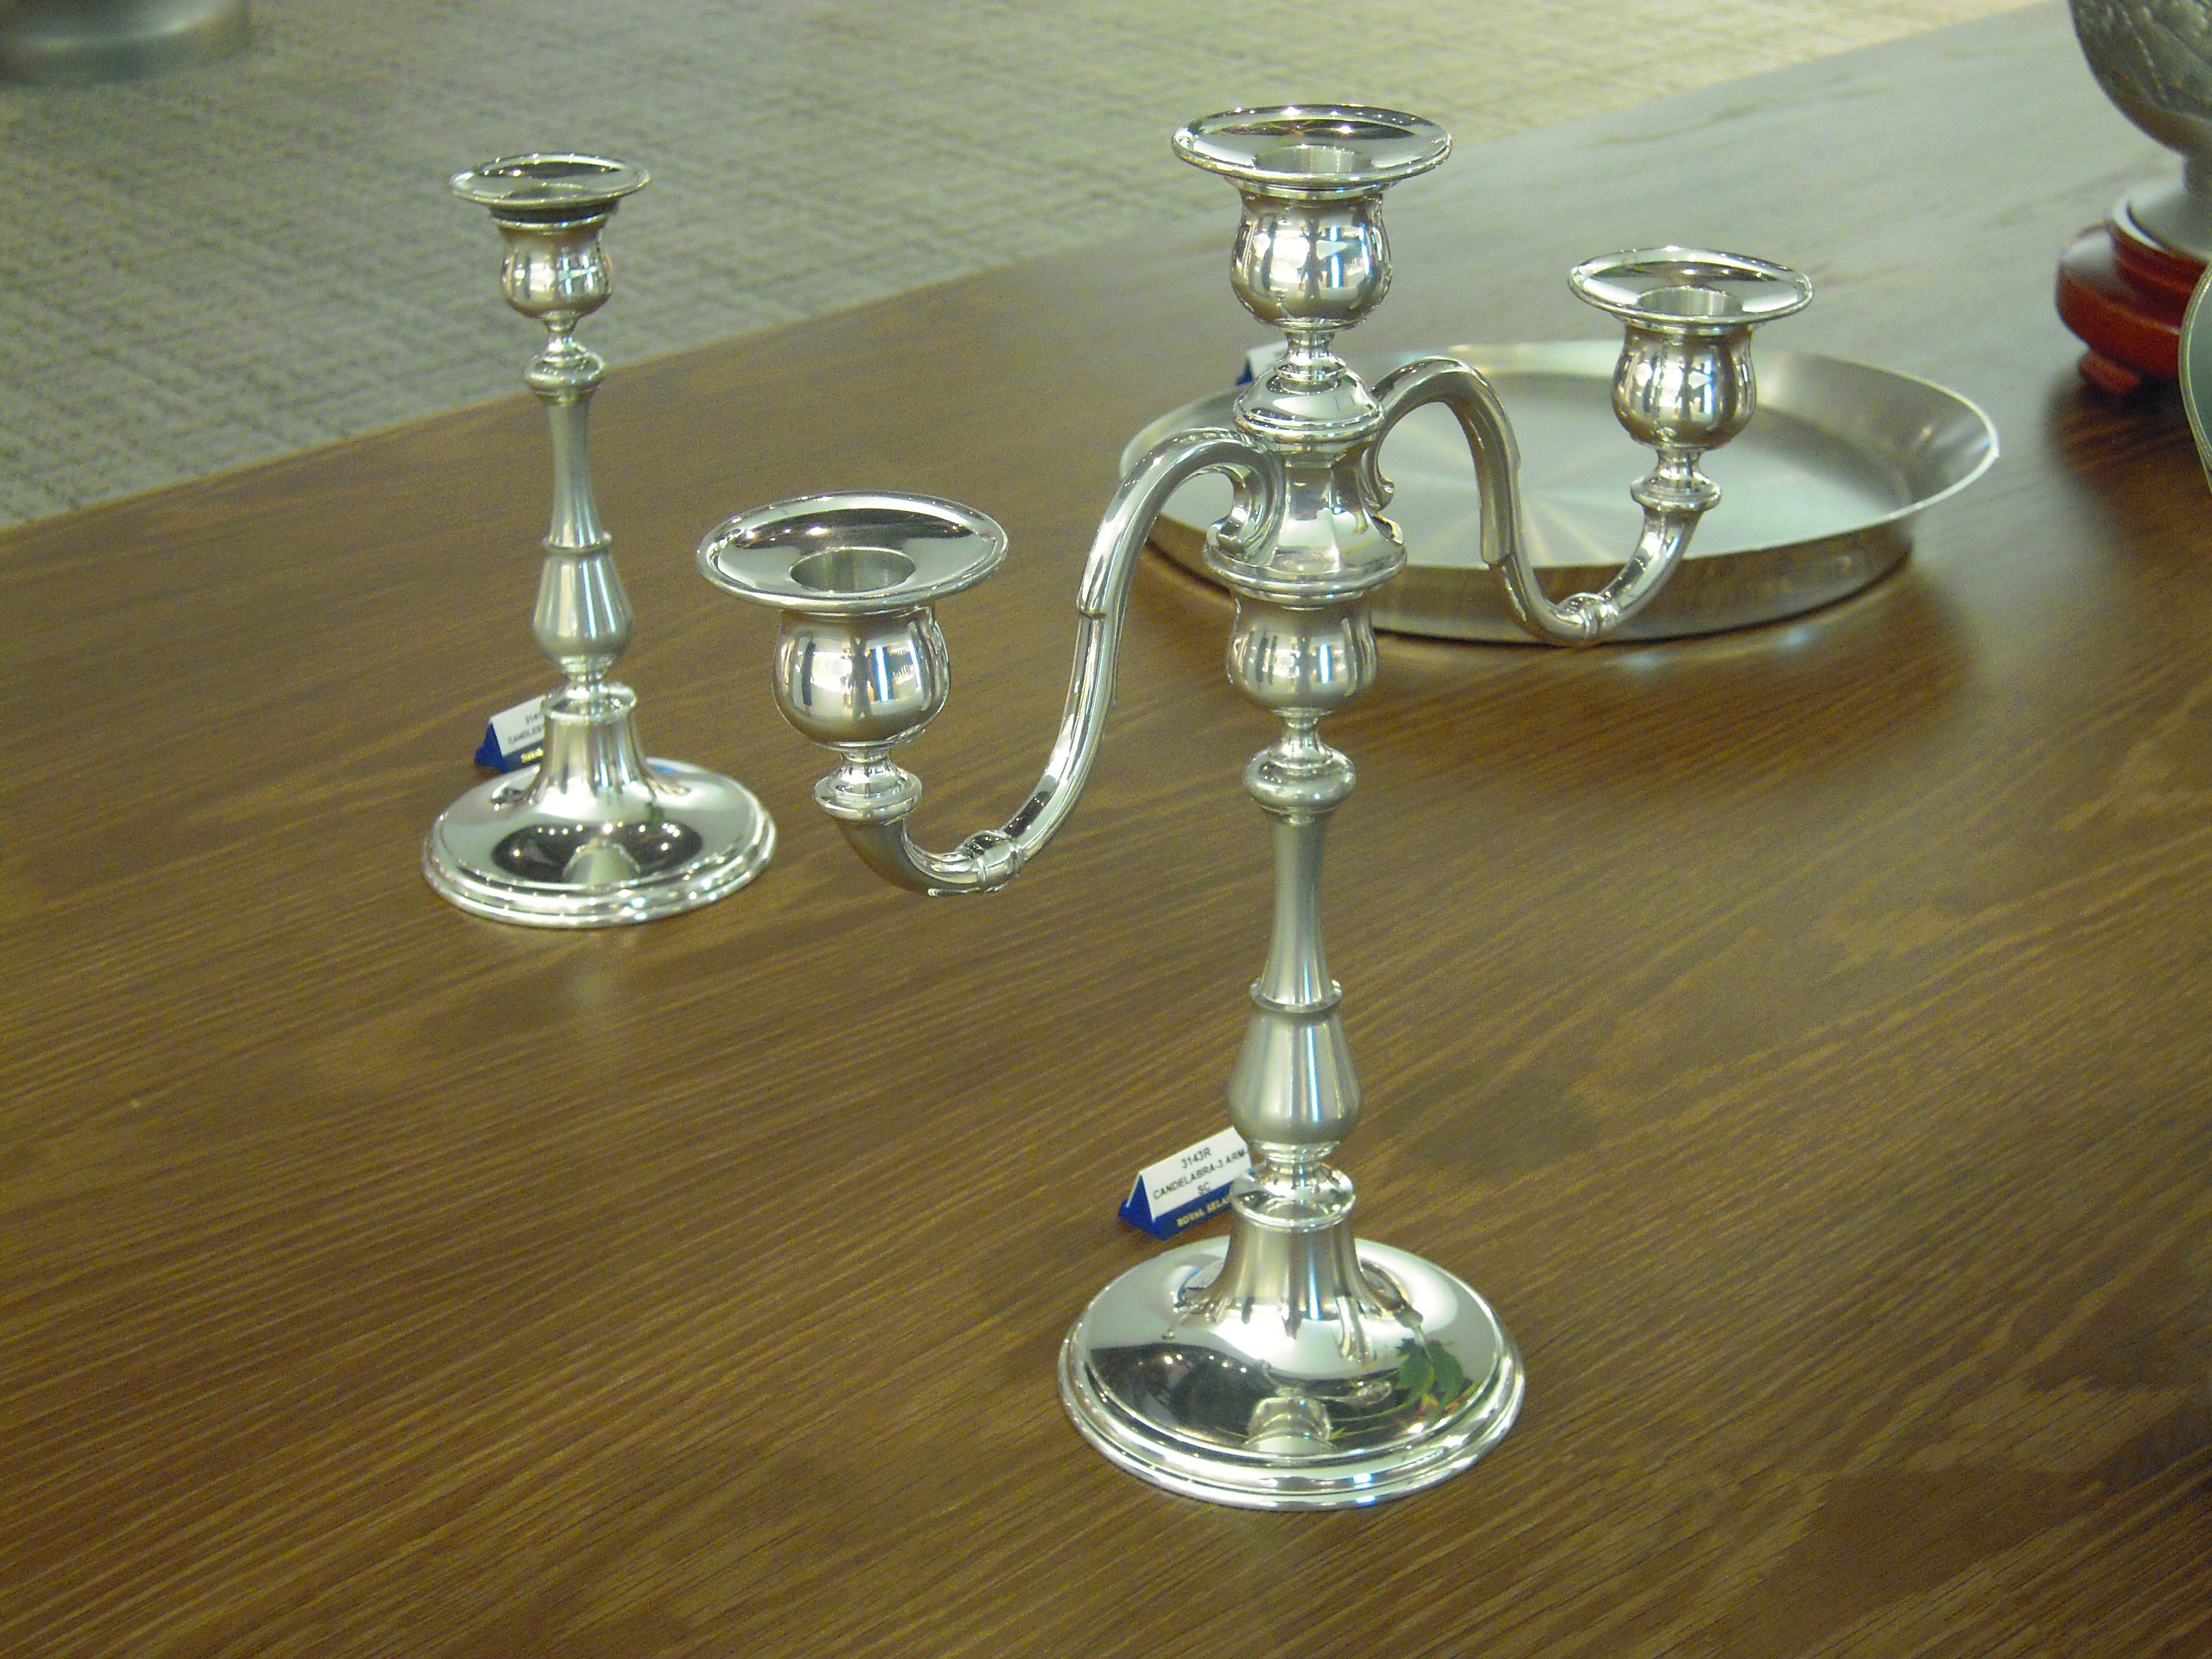 Two ornate, shiny, silver coloured, candlesticks and a silver coloured plate on a wooden table